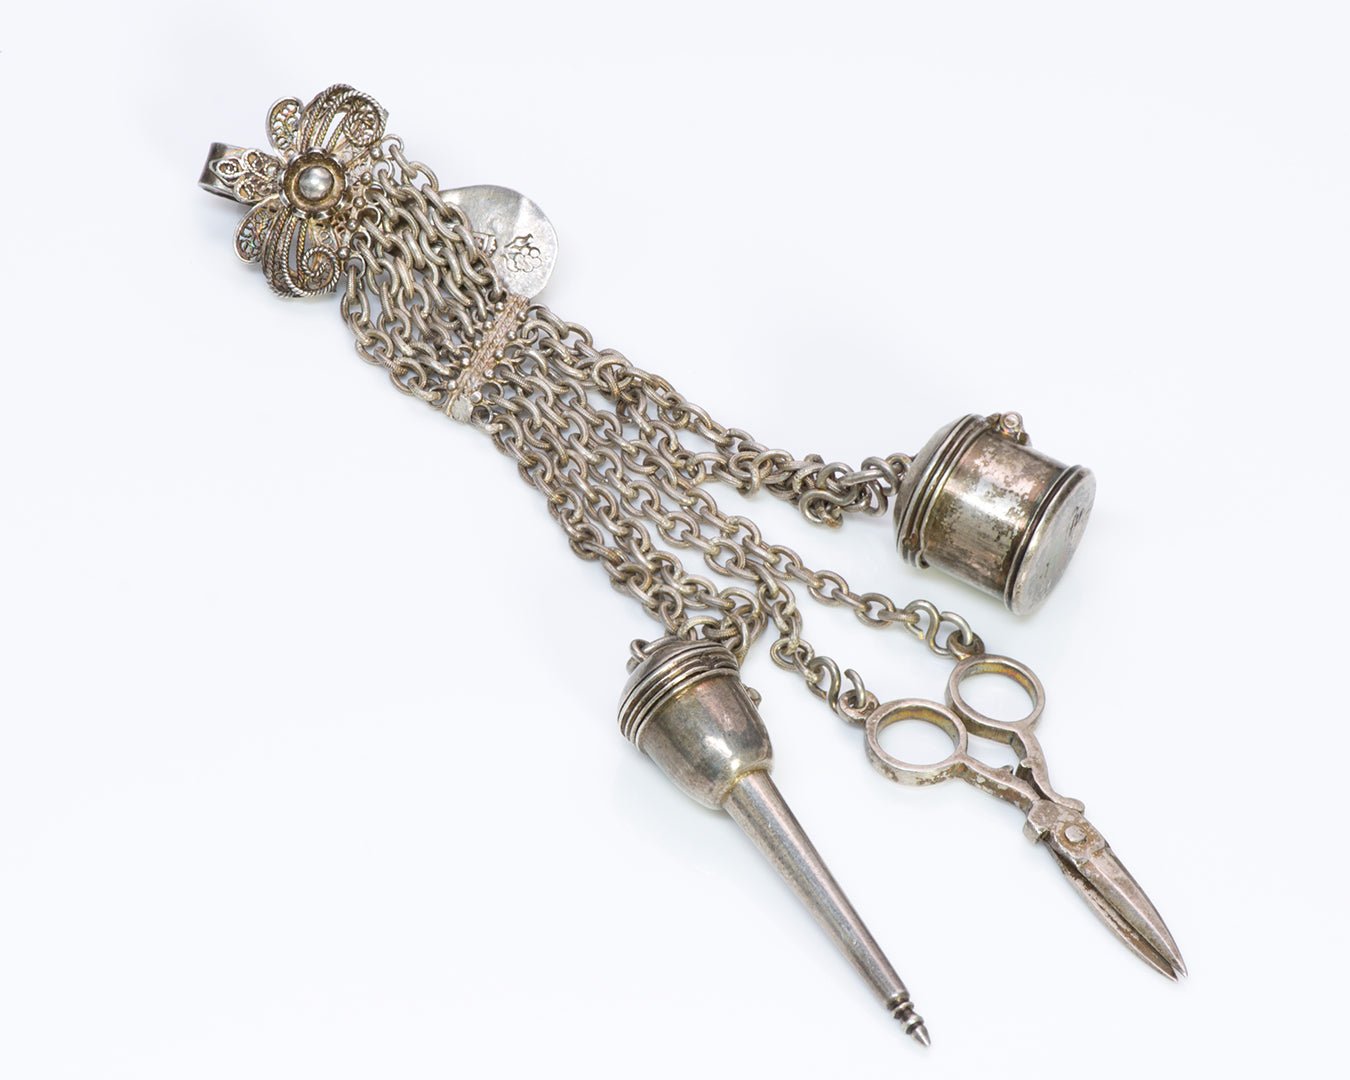 Antique Miniature Silver Chatelaine Sawing Items